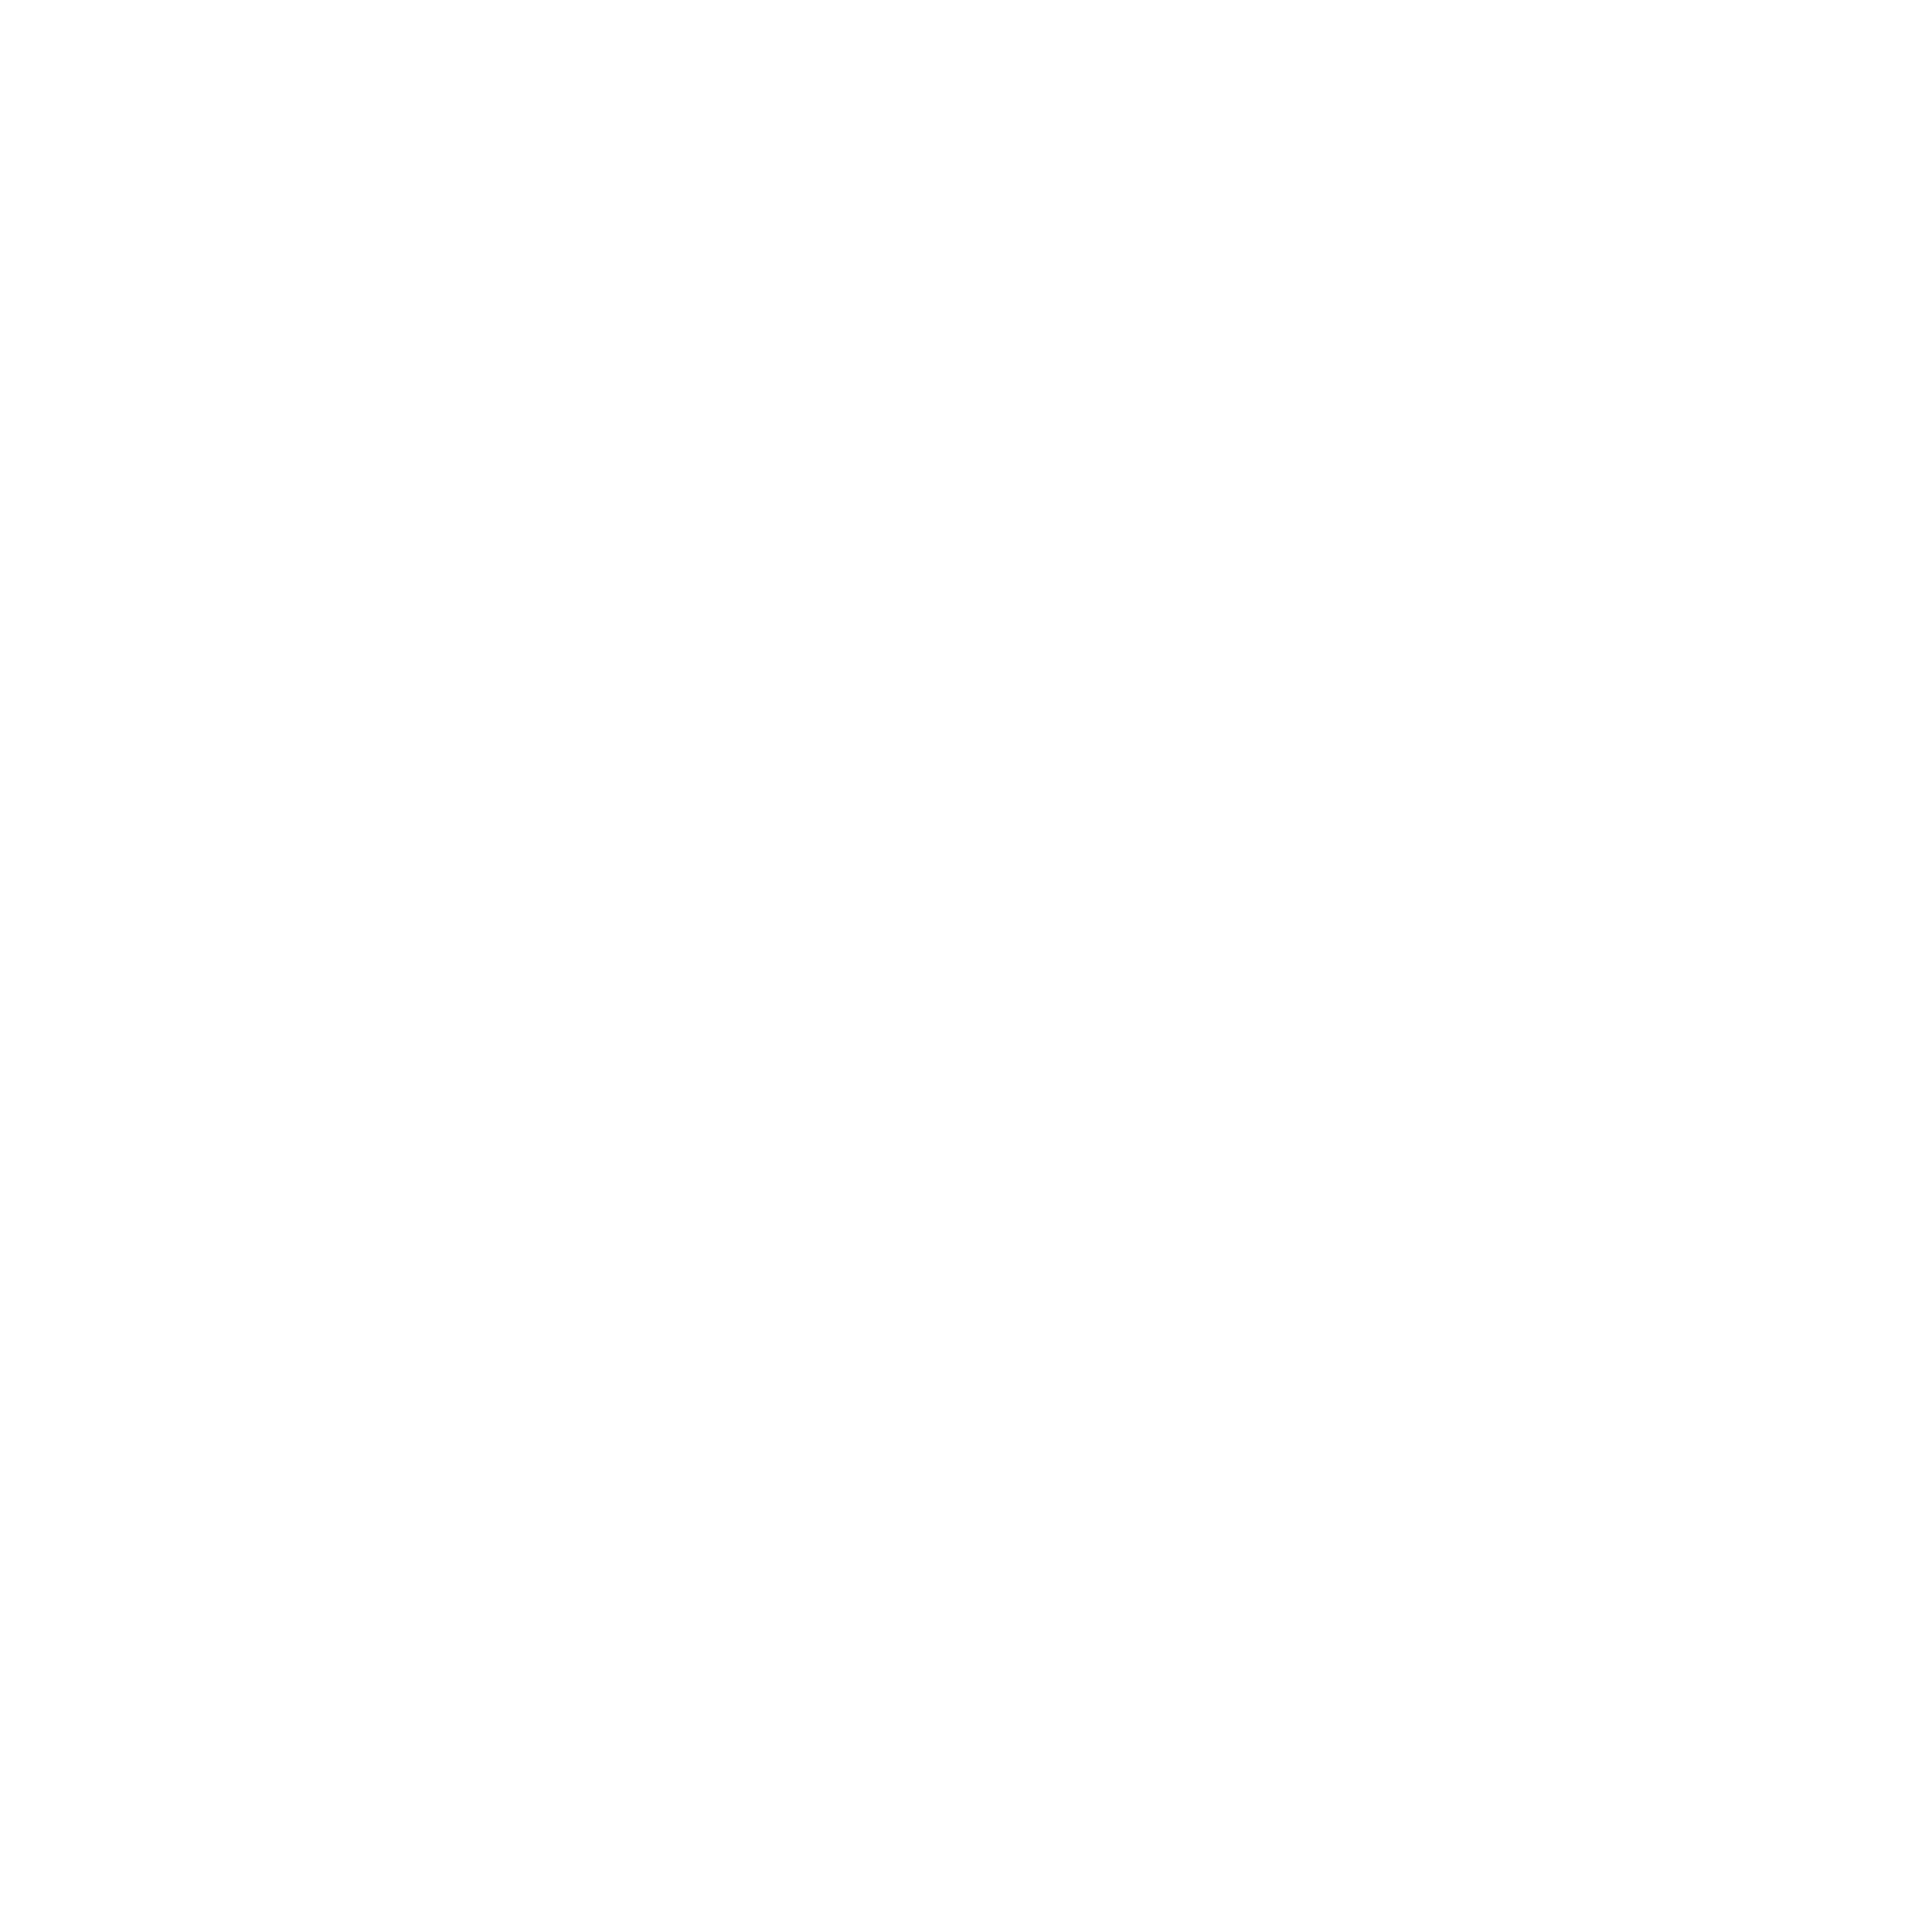 resumewritingbcpatches